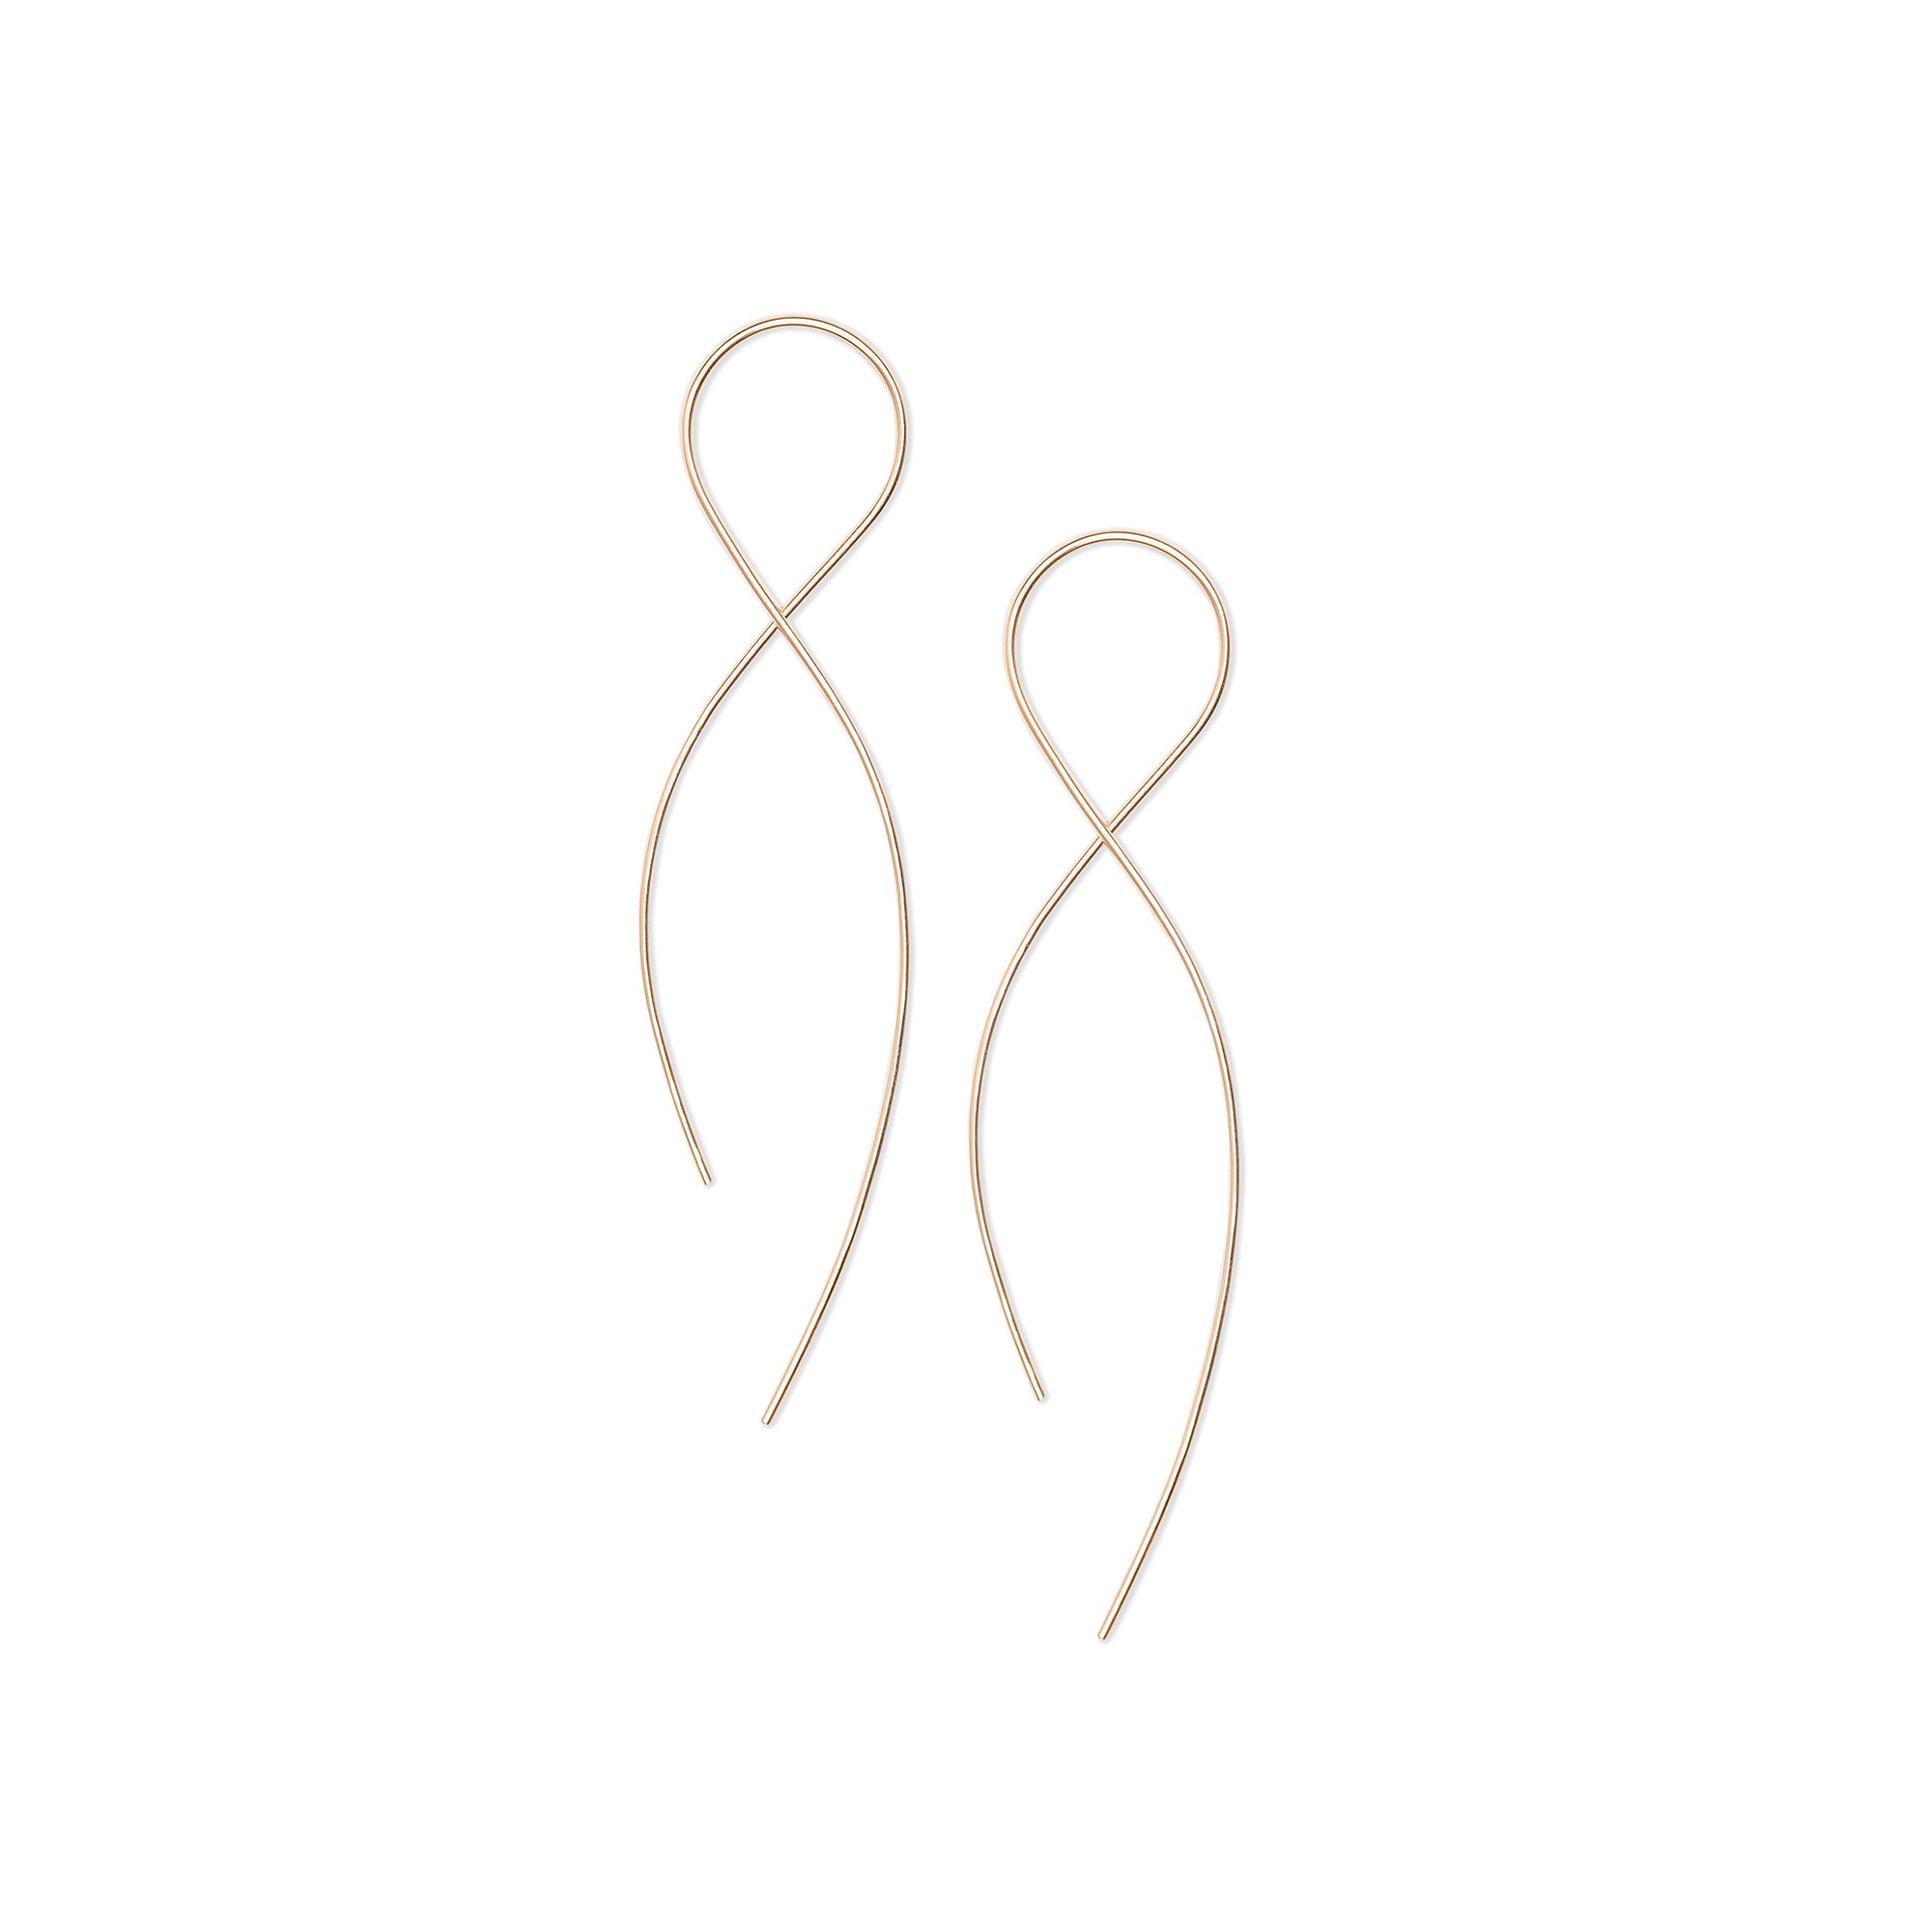 Lightweight and elegant, our signature Infinity Earrings are a perfect alternative to the traditional hoop